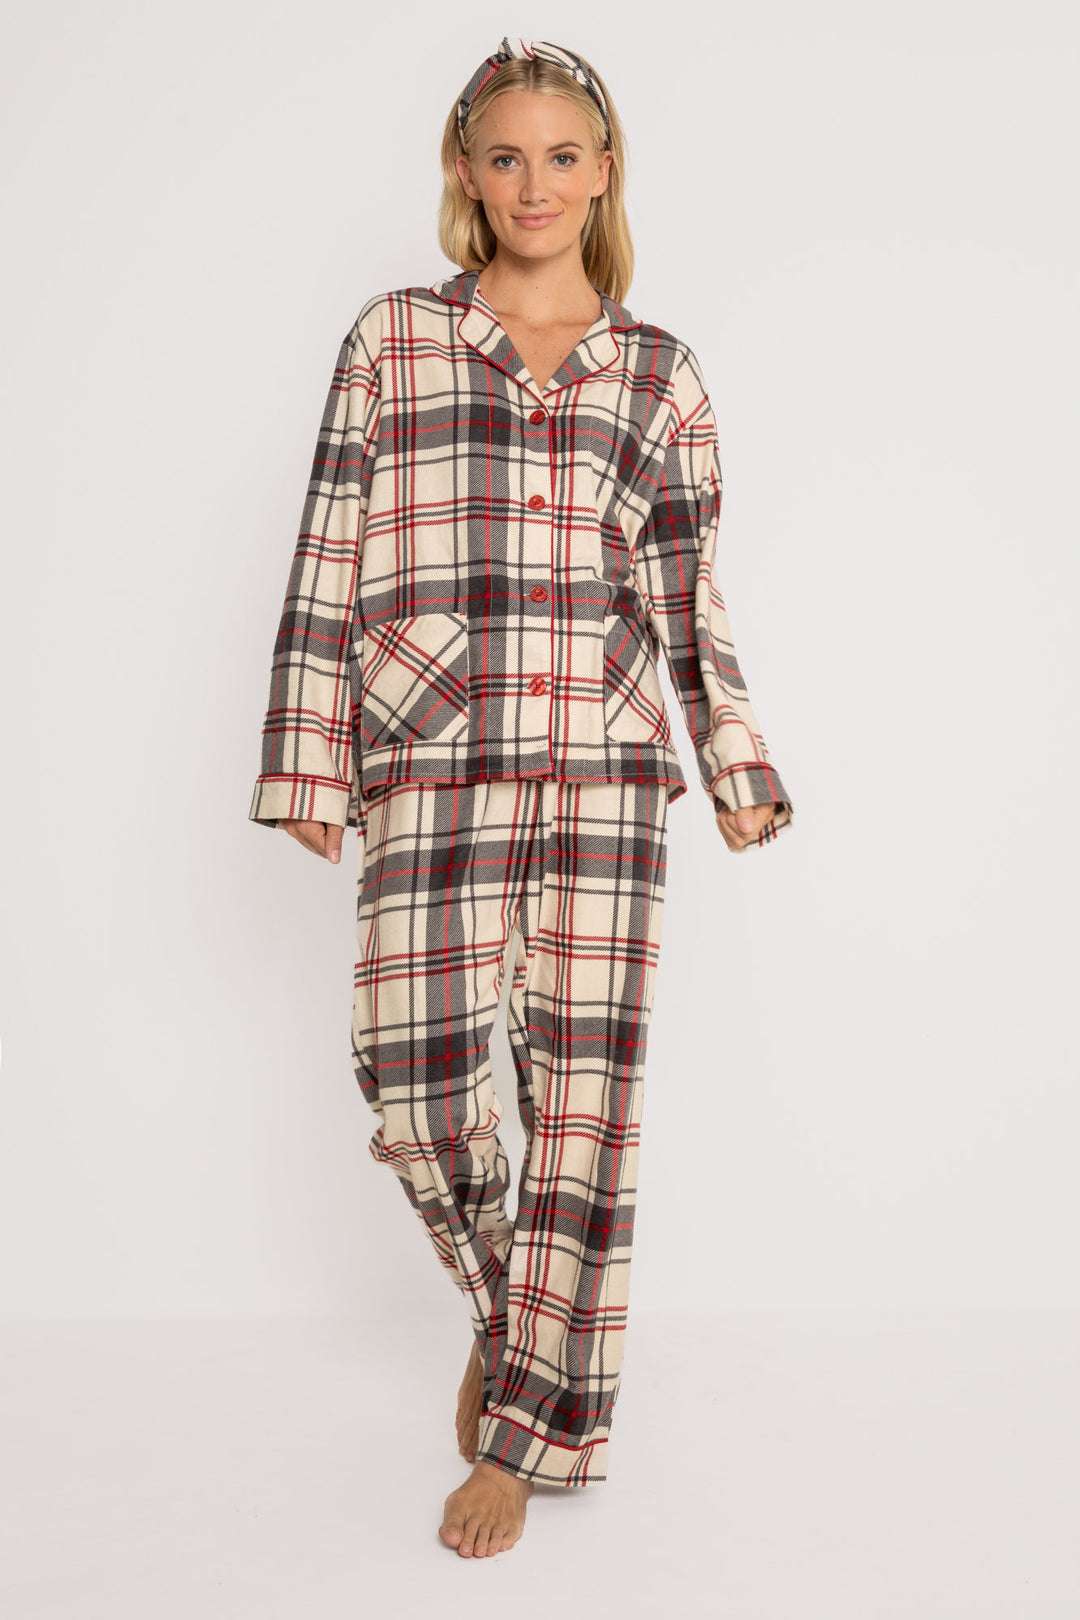 Women's cotton flannel pajama set in tan-red-grey plaid. Button top & tie-waist pj pant, relaxed fit. (7257679233124)